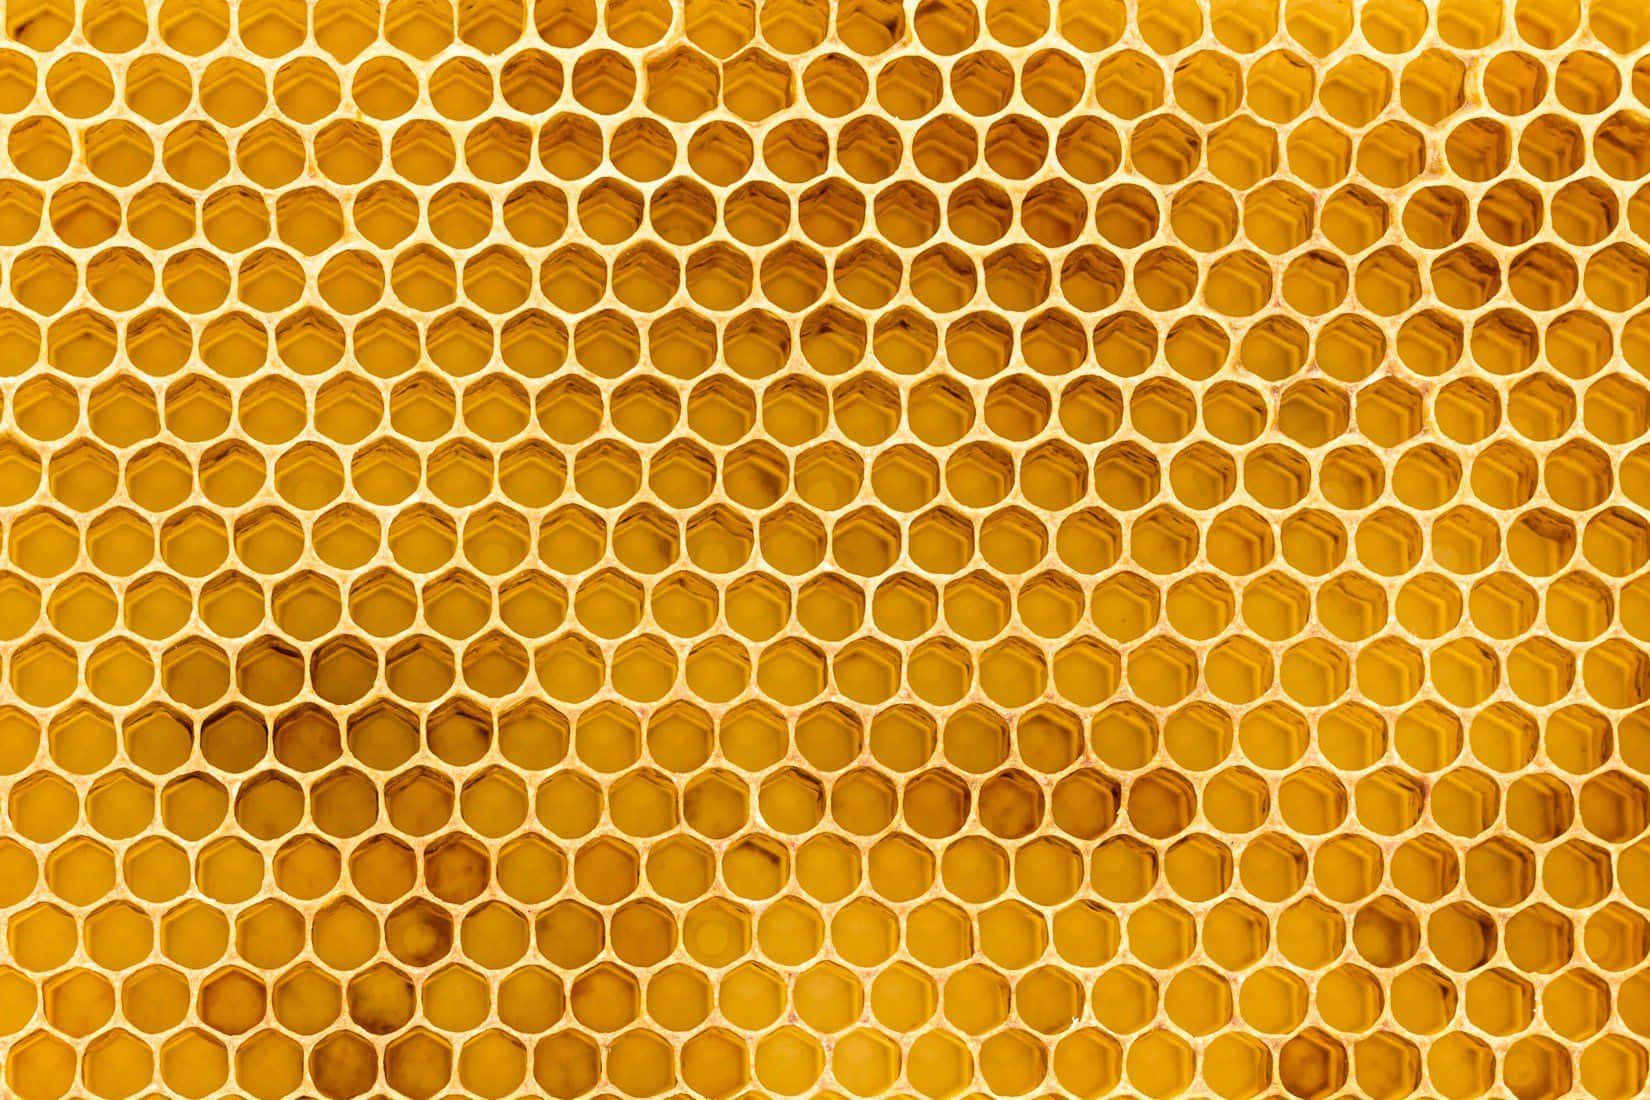 Honeycomb Structure